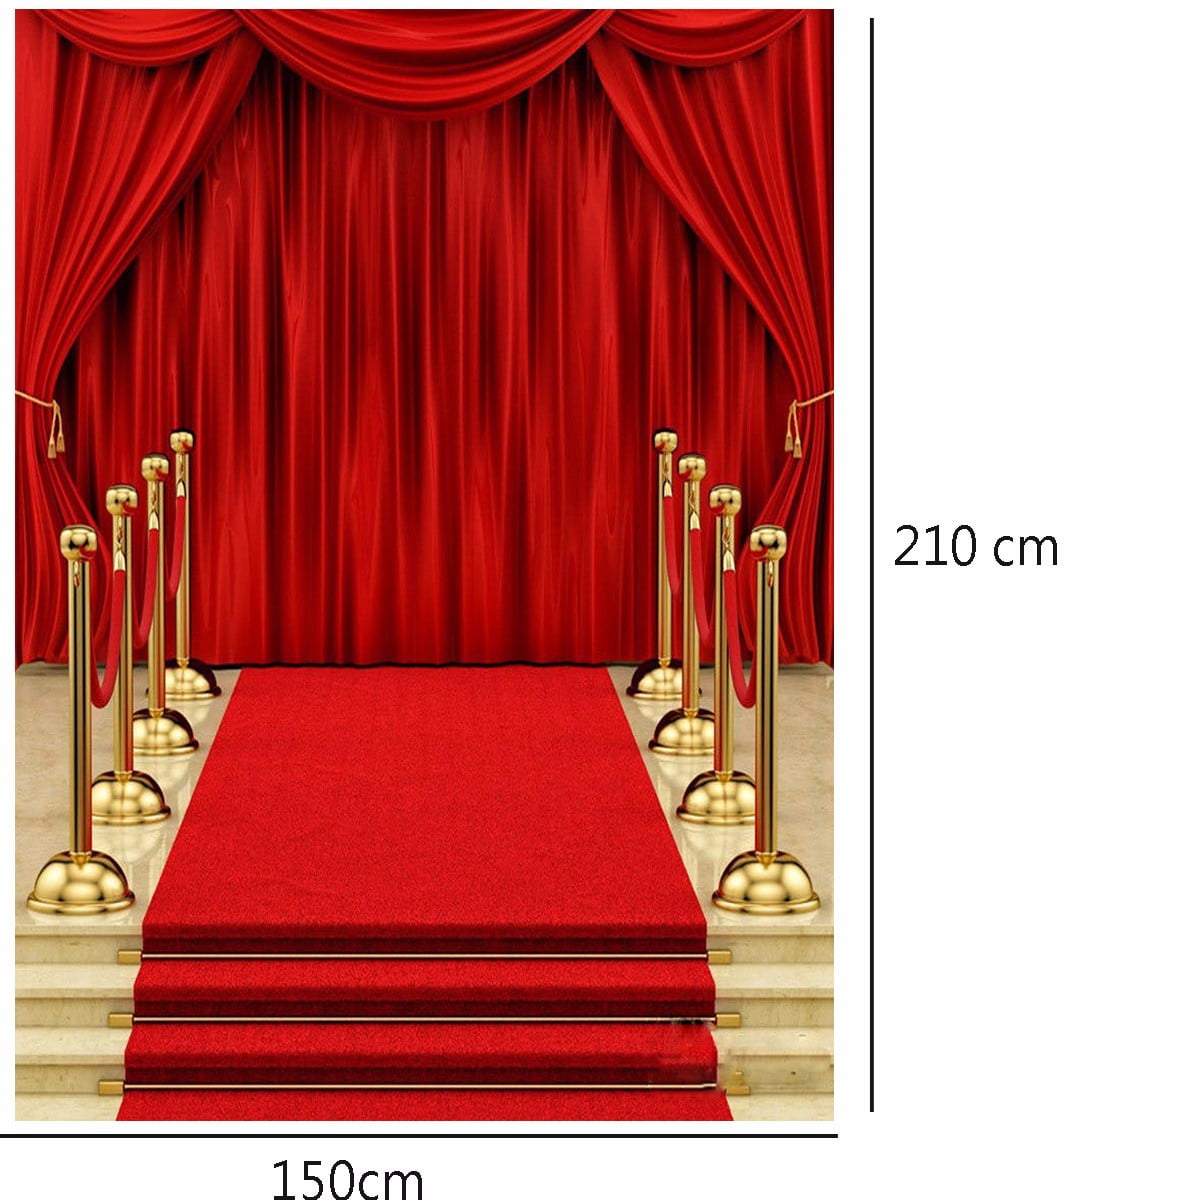 M Way Red Carpet Curtainvinyl Backdrop Photo Studiophotography Background Prop 5x7ft Walmart Com Walmart Com Download these studio background or photos and you can use them for many purposes, such as banner, wallpaper, poster background as well as powerpoint background and website background. walmart com